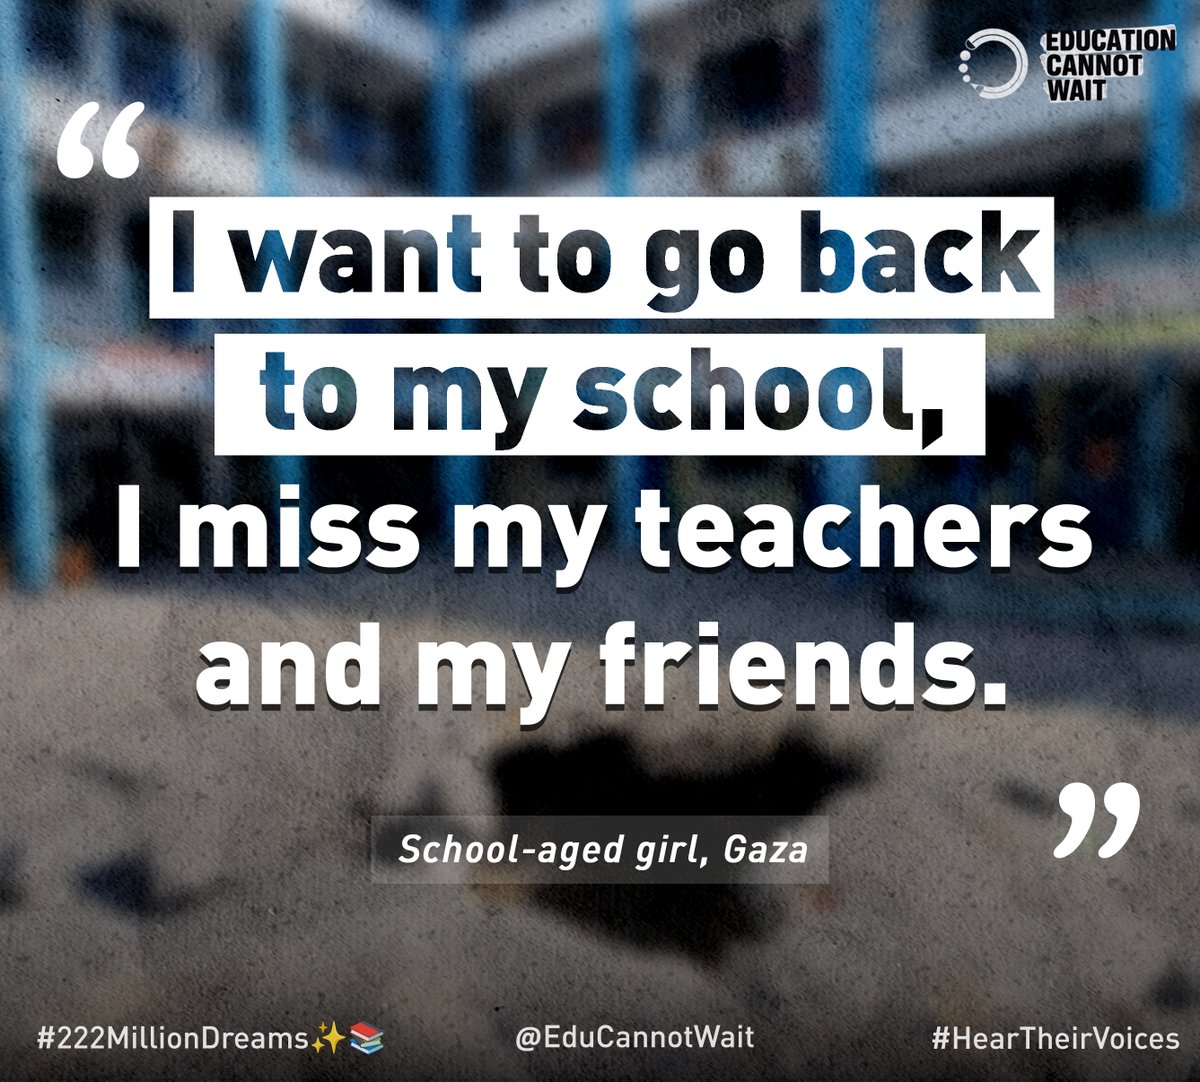 #HearTheirVoices: 'I want to go back to my school, I miss my teachers and my friends.' ~School-aged girl, #Gaza #ECW supports every child's right to the safety & hope of continuing education; esp. in armed conflict. Their learning & mental health depend on it. @UN @UNRWA